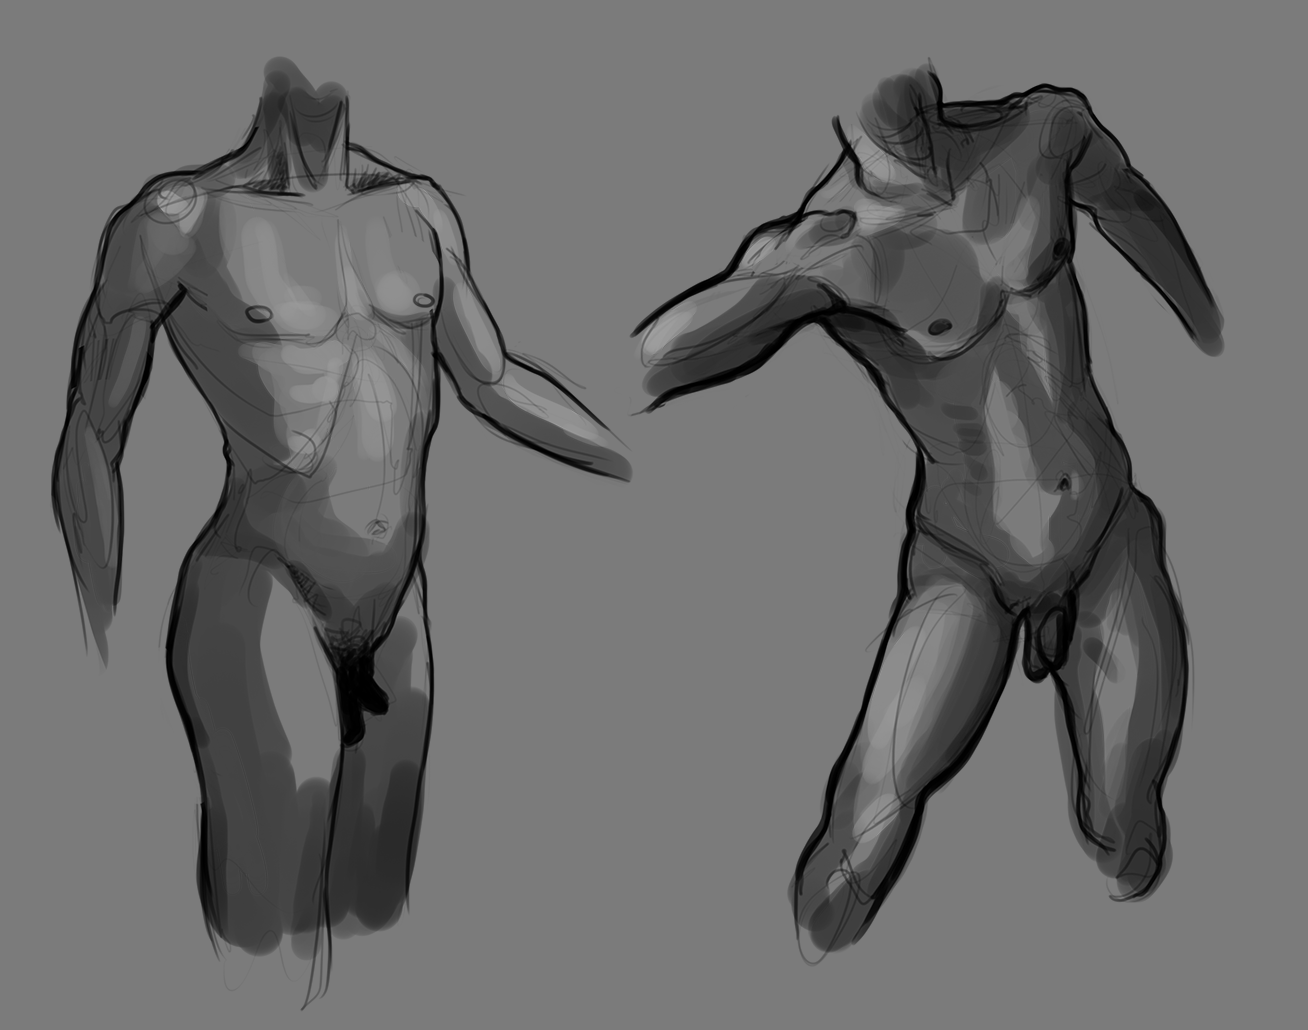 XaB au travail ! [nudity inside] - Page 11 SpeedStudies_2016-08-31-torse%252Bhanches_homme